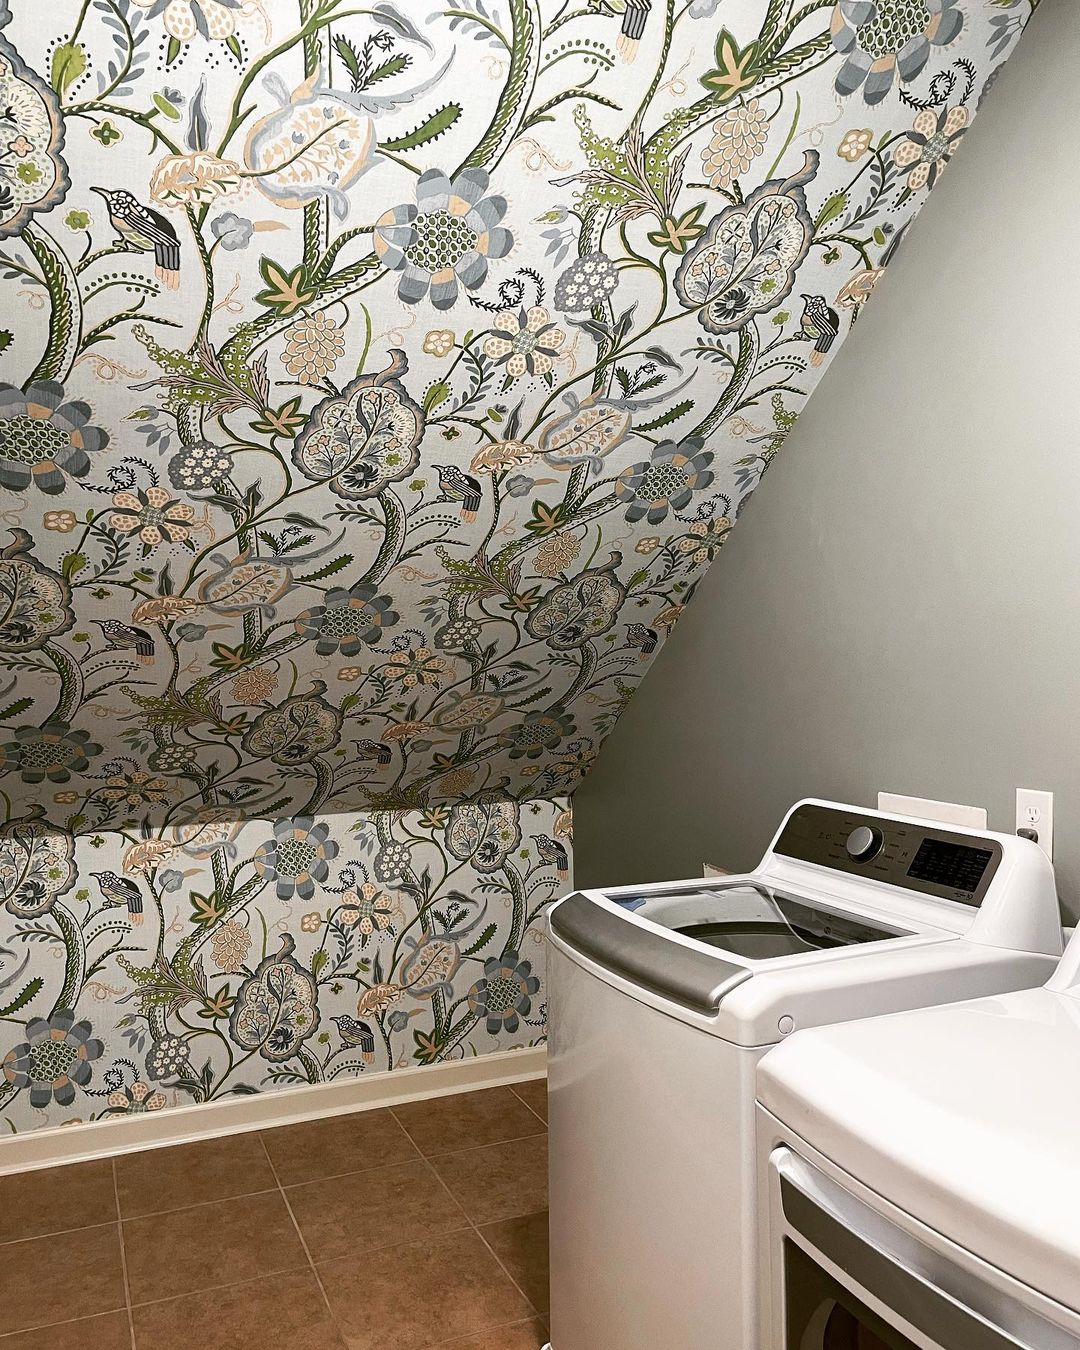 Floral Patterns for an Attic Laundry Room